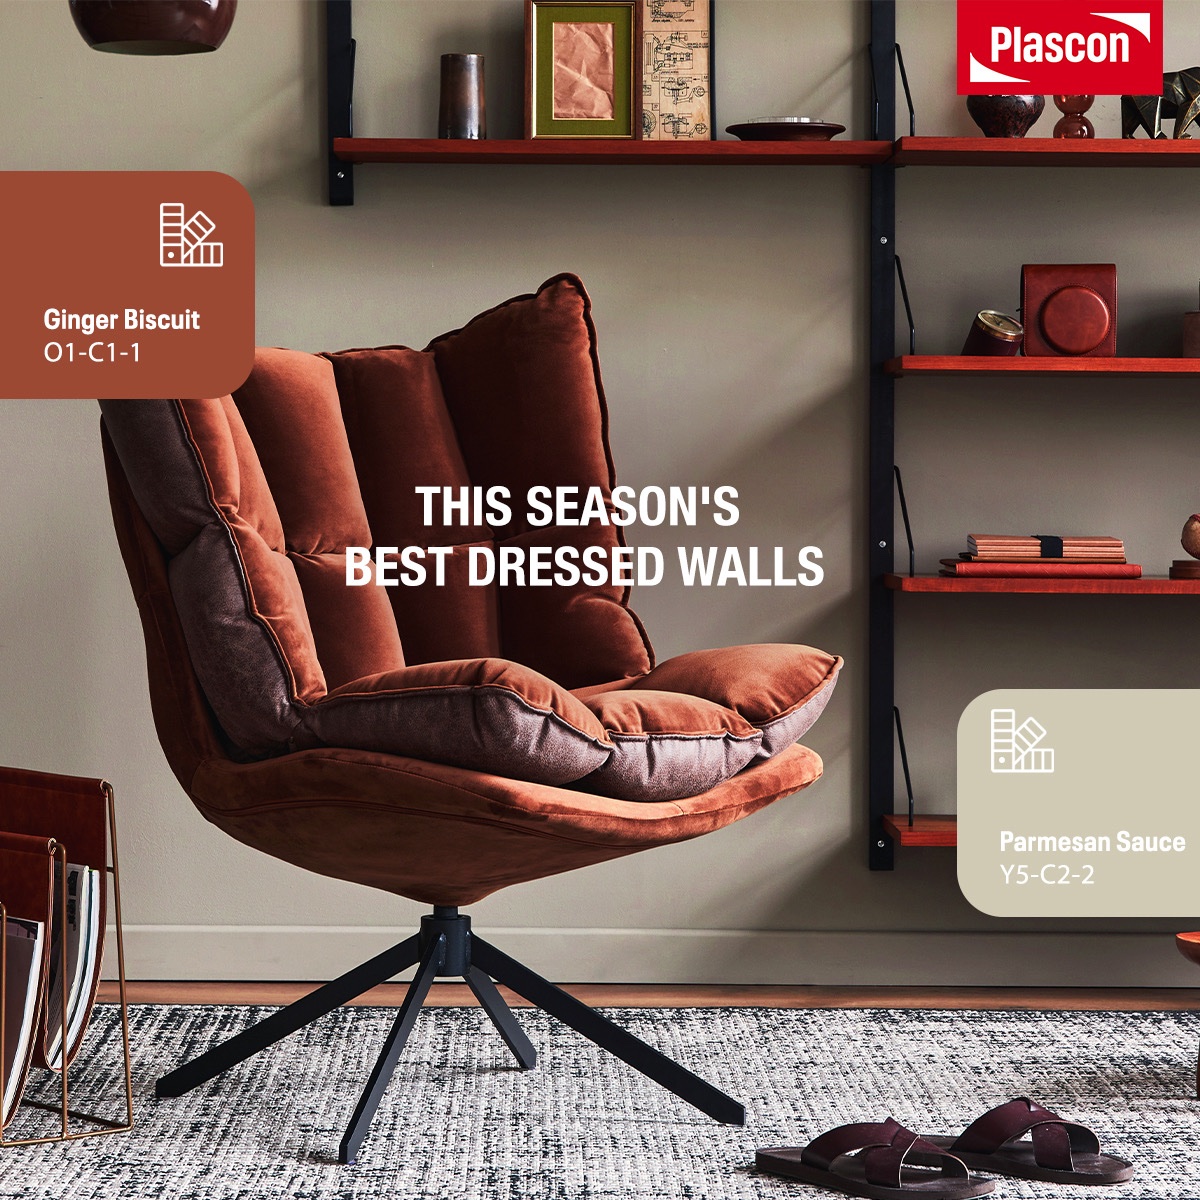 Let your walls wear this season’s best! 🎨 Ginger Biscuit’s (O1-C1-1) rich earthiness, paired with the subtle elegance of Parmesan Sauce (Y5-C2-2) and the fresh touch of Green Fog - it’s style in every shade.

#AutumnHues #TogetherWeveGotThis #PlasconSA #PaintingTips #DIY